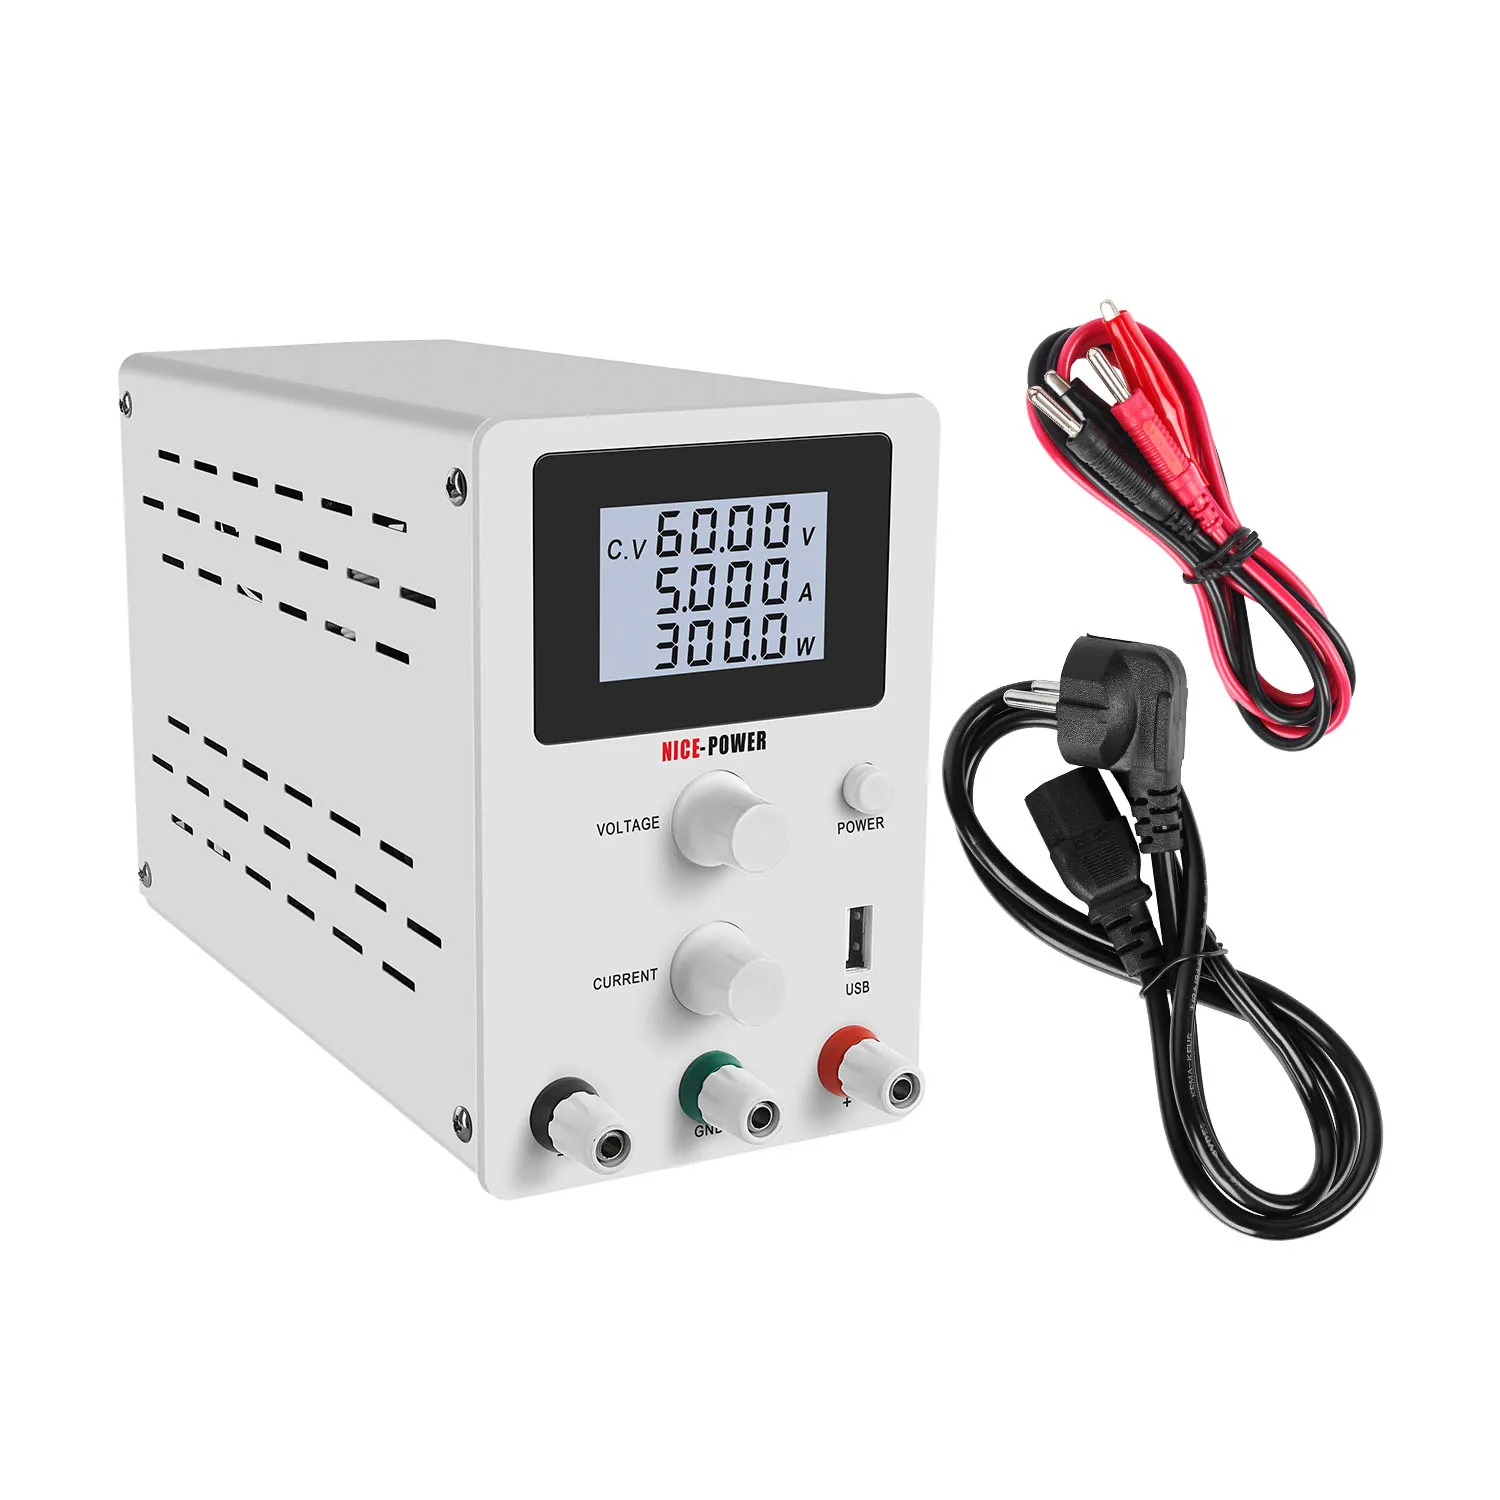 TekPower TP6005E DC Adjustable Switching Power Supply 60V 5A  Digital Display 